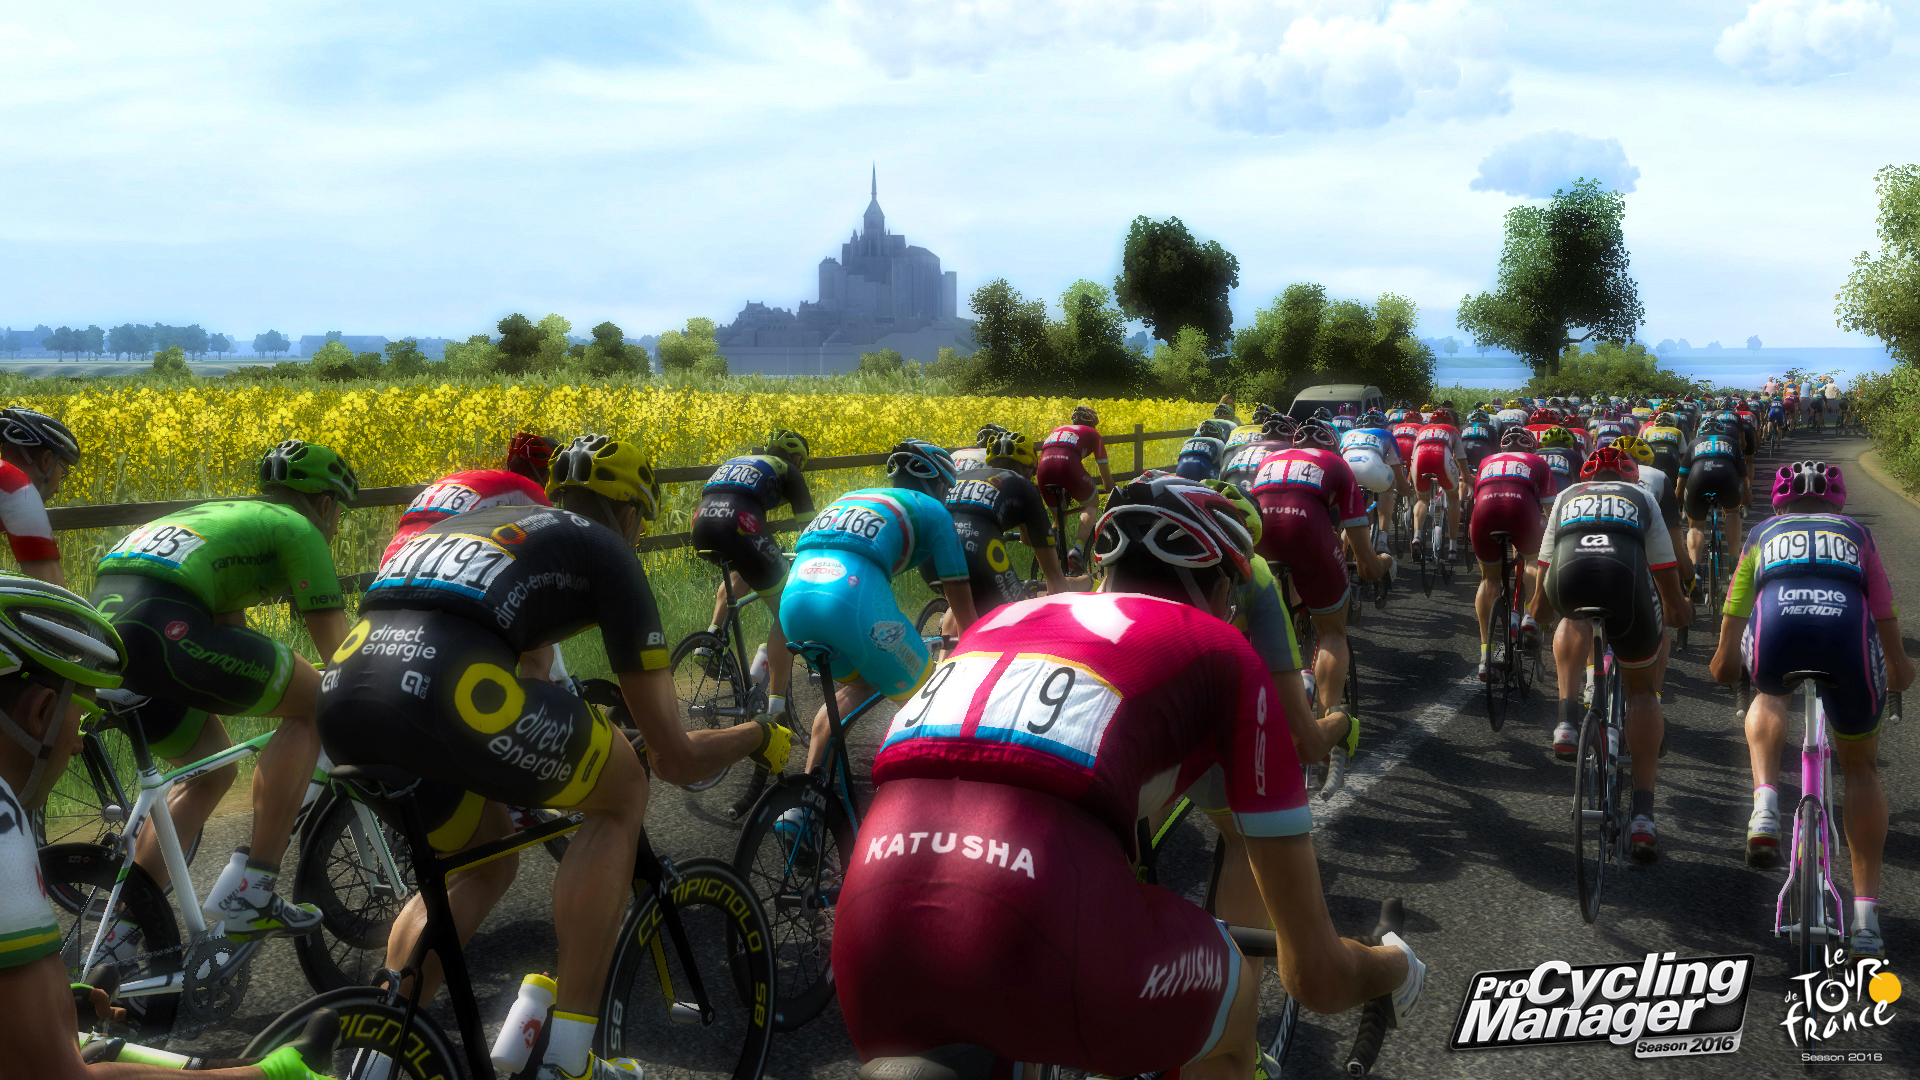 Pro Cycling Manager 2022 System Requirements - Can I Run It? -  PCGameBenchmark